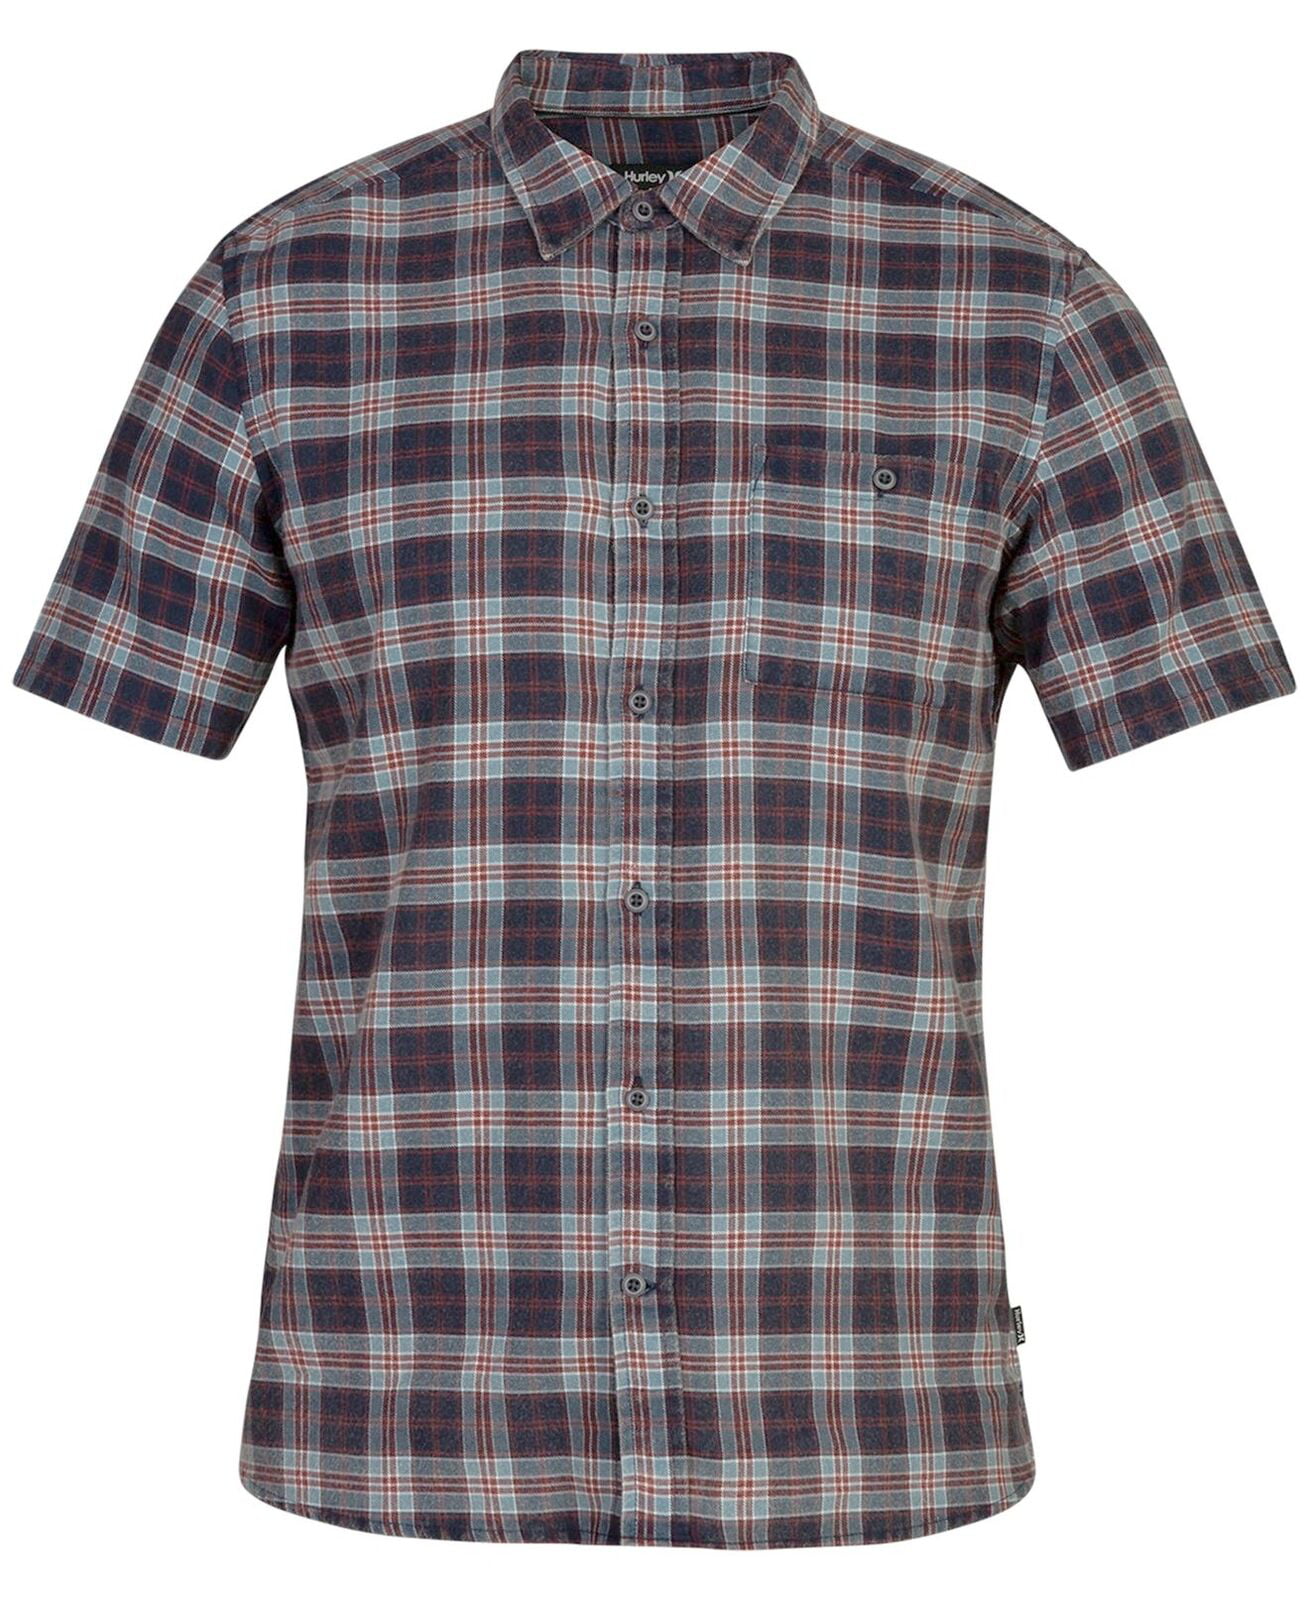 Hurley - Mens Shirt Blue Button-Front Woven Classic Fit Plaid $50 2XL ...